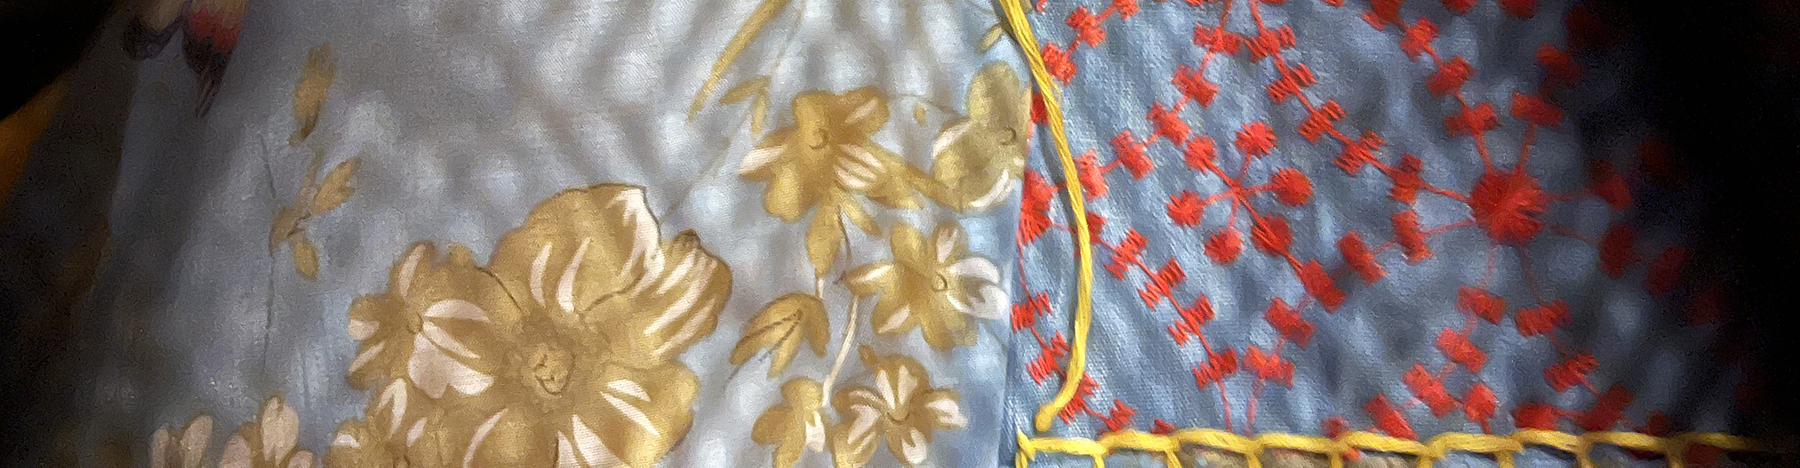 Light blue fabric with gold and red flowers, yellow yarn stitching, and dappled light falling on it with shadows on the right and left edges.